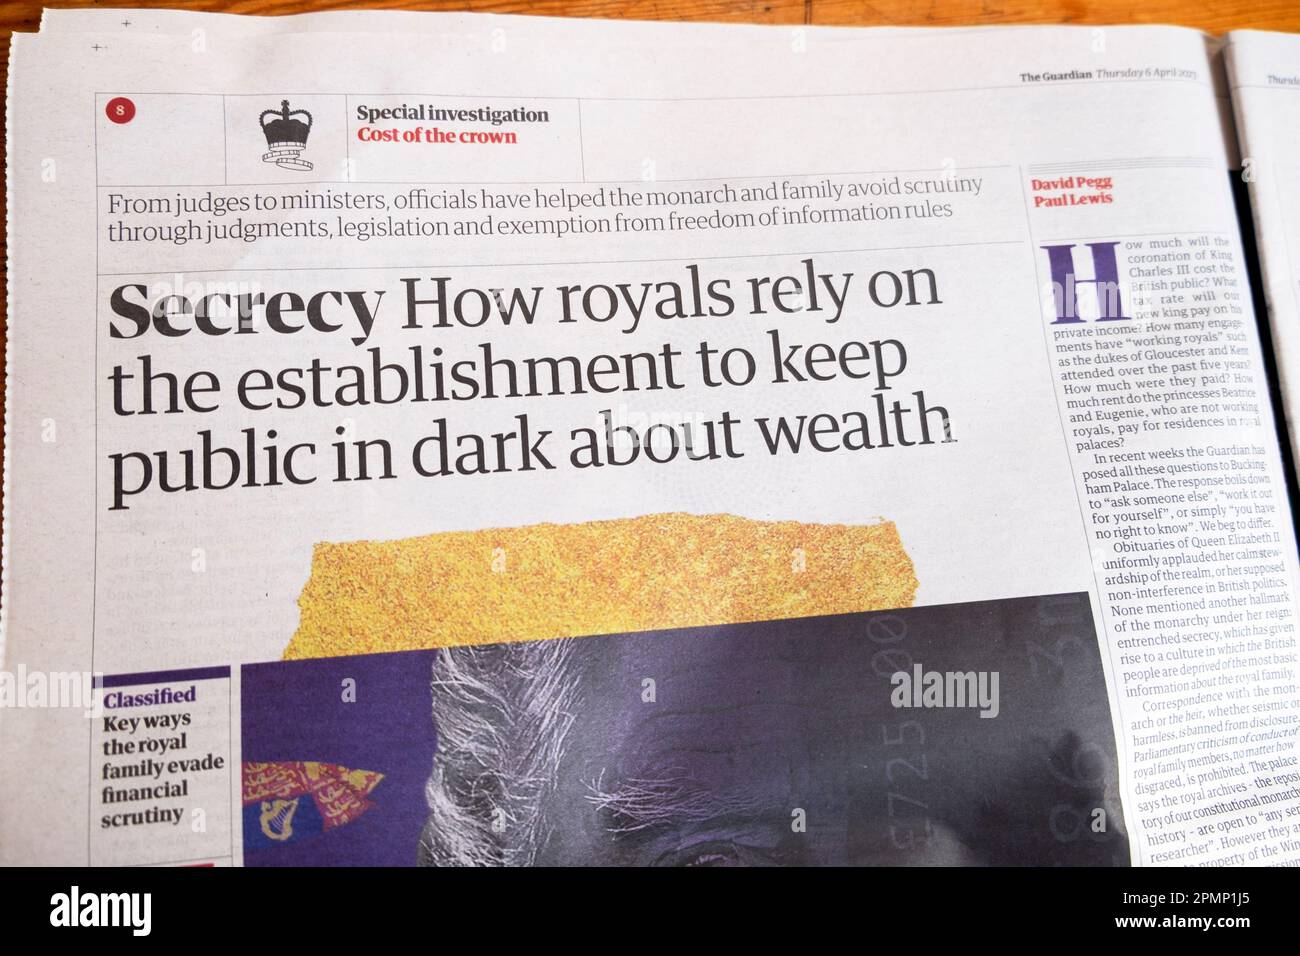 'Secrecy How royals rely on the establishment to keep public in dark about wealth' Guardian newspaper headline Cost of the Crown article 6 April 2023 Stock Photo